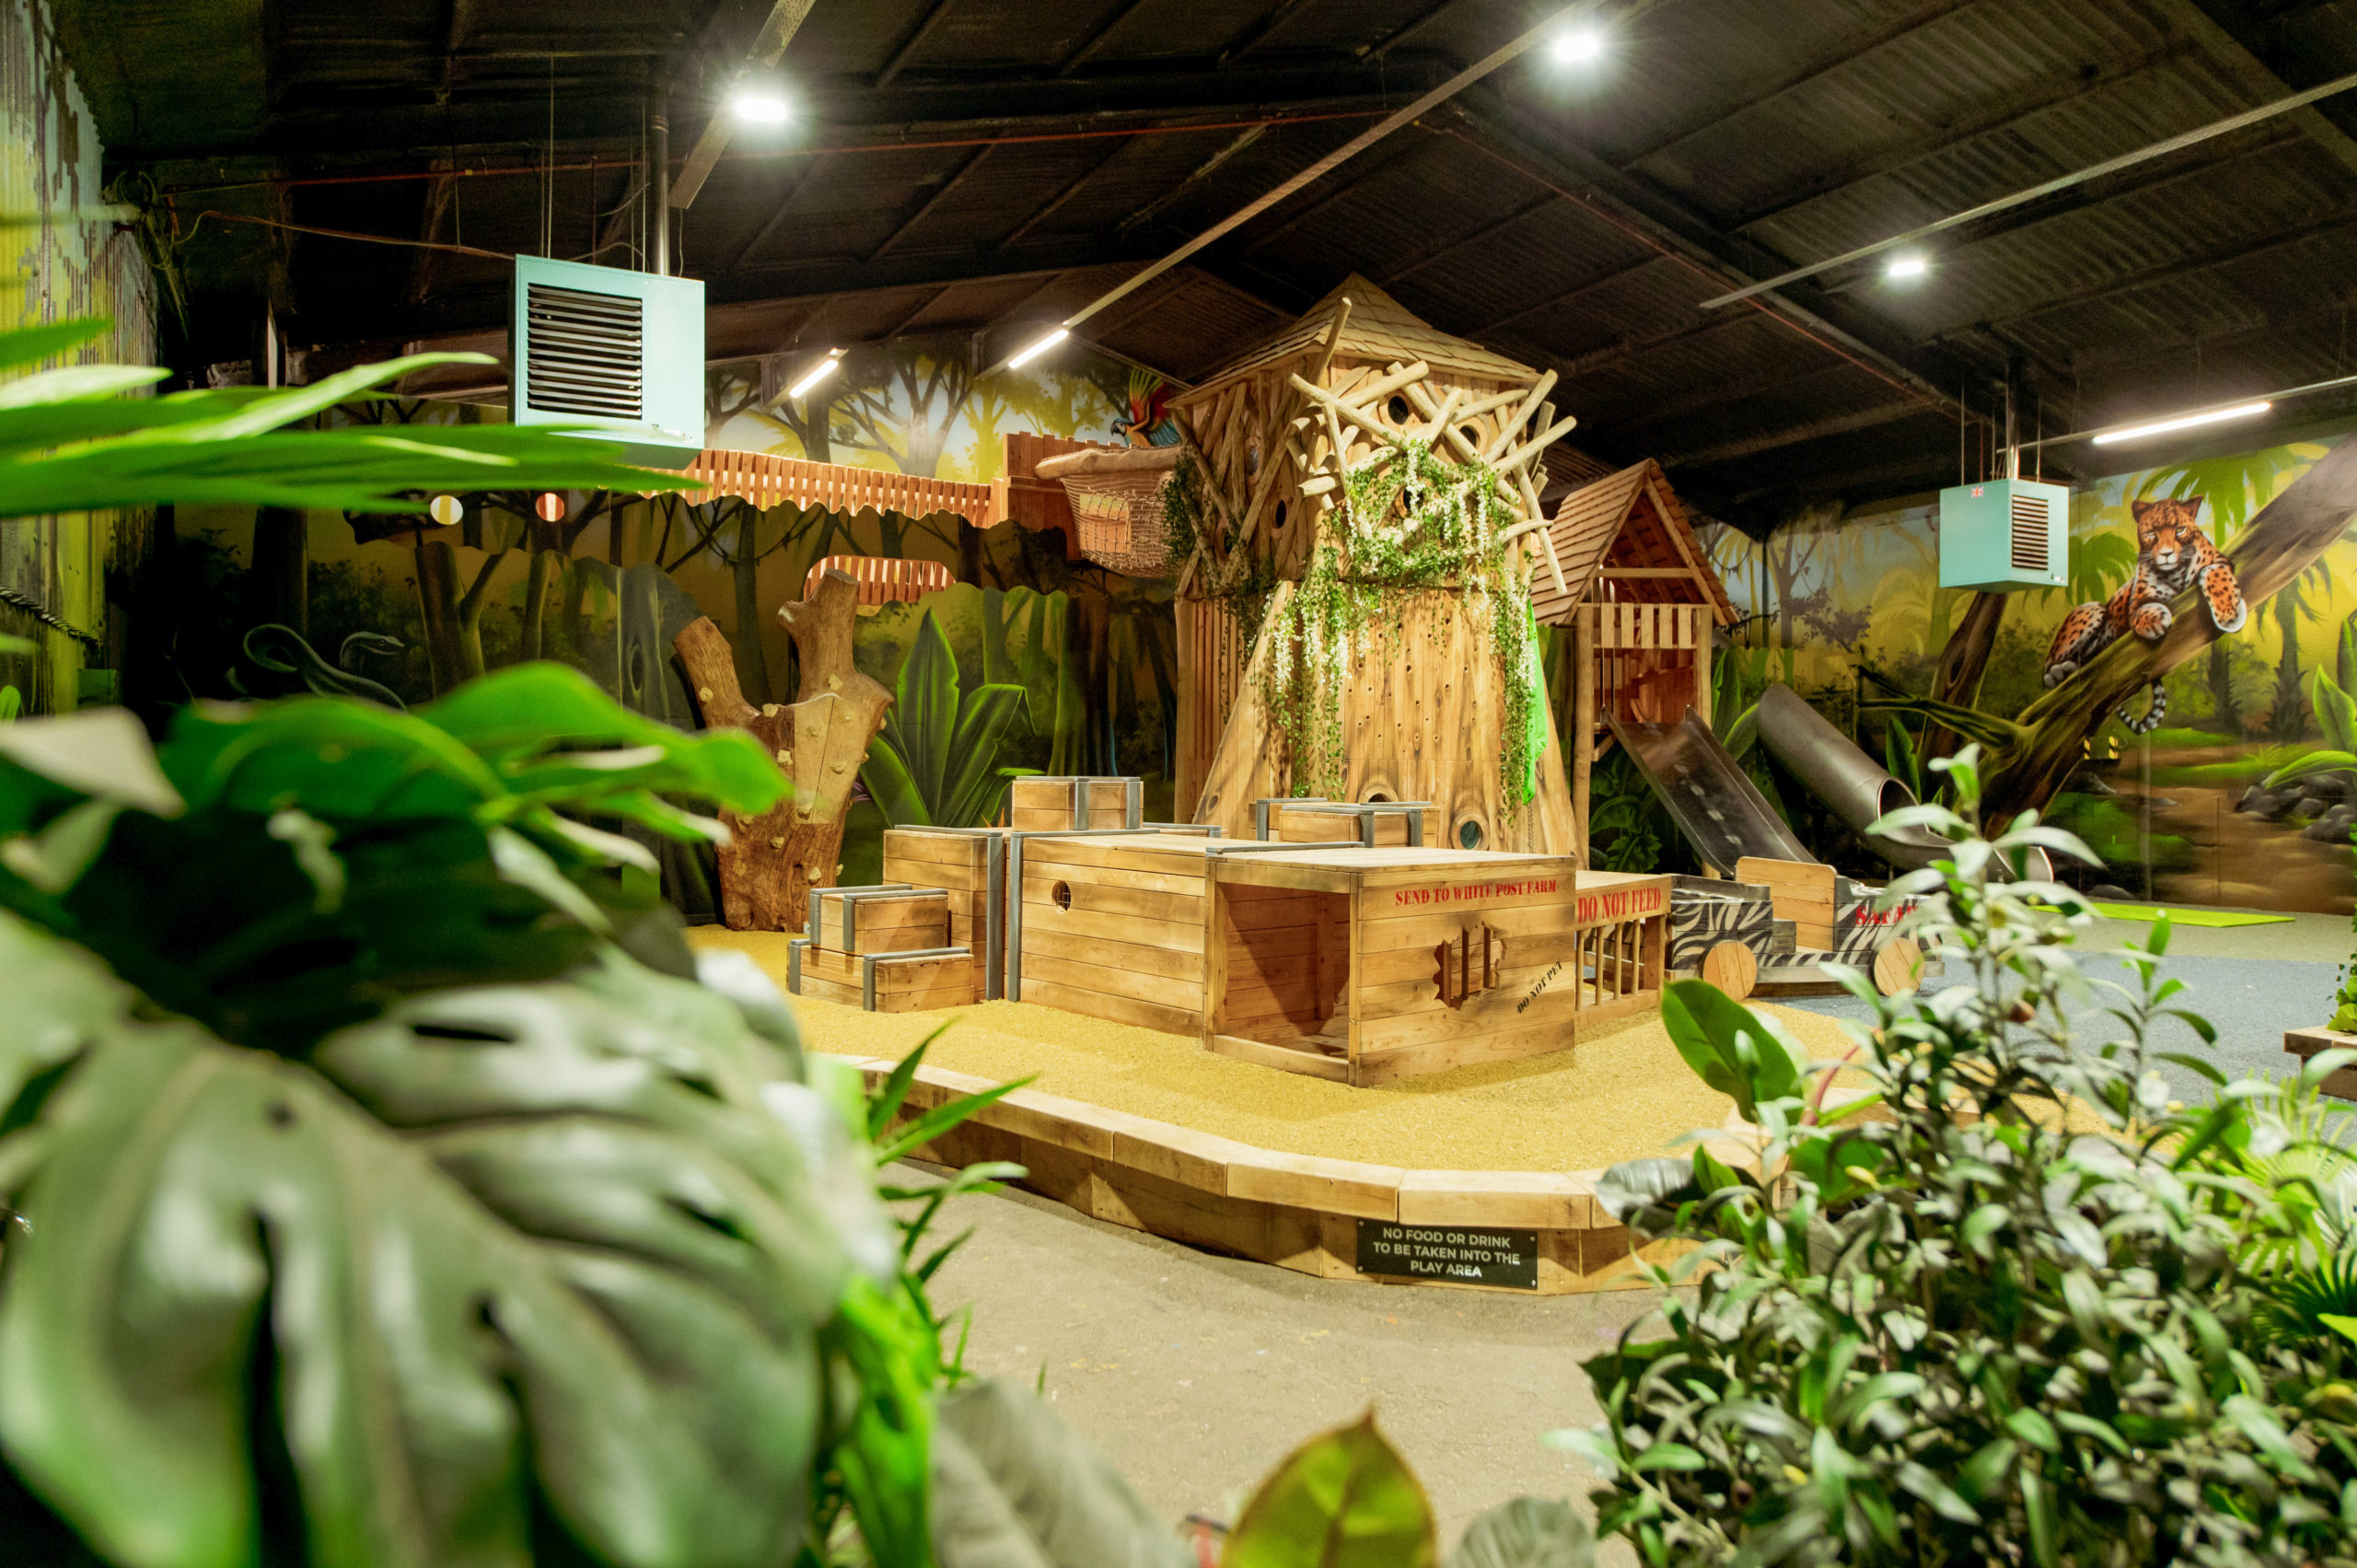 An indoor jungle-themed playground with various elements like bespoke wooden towers and structures, green plants, and painted walls.